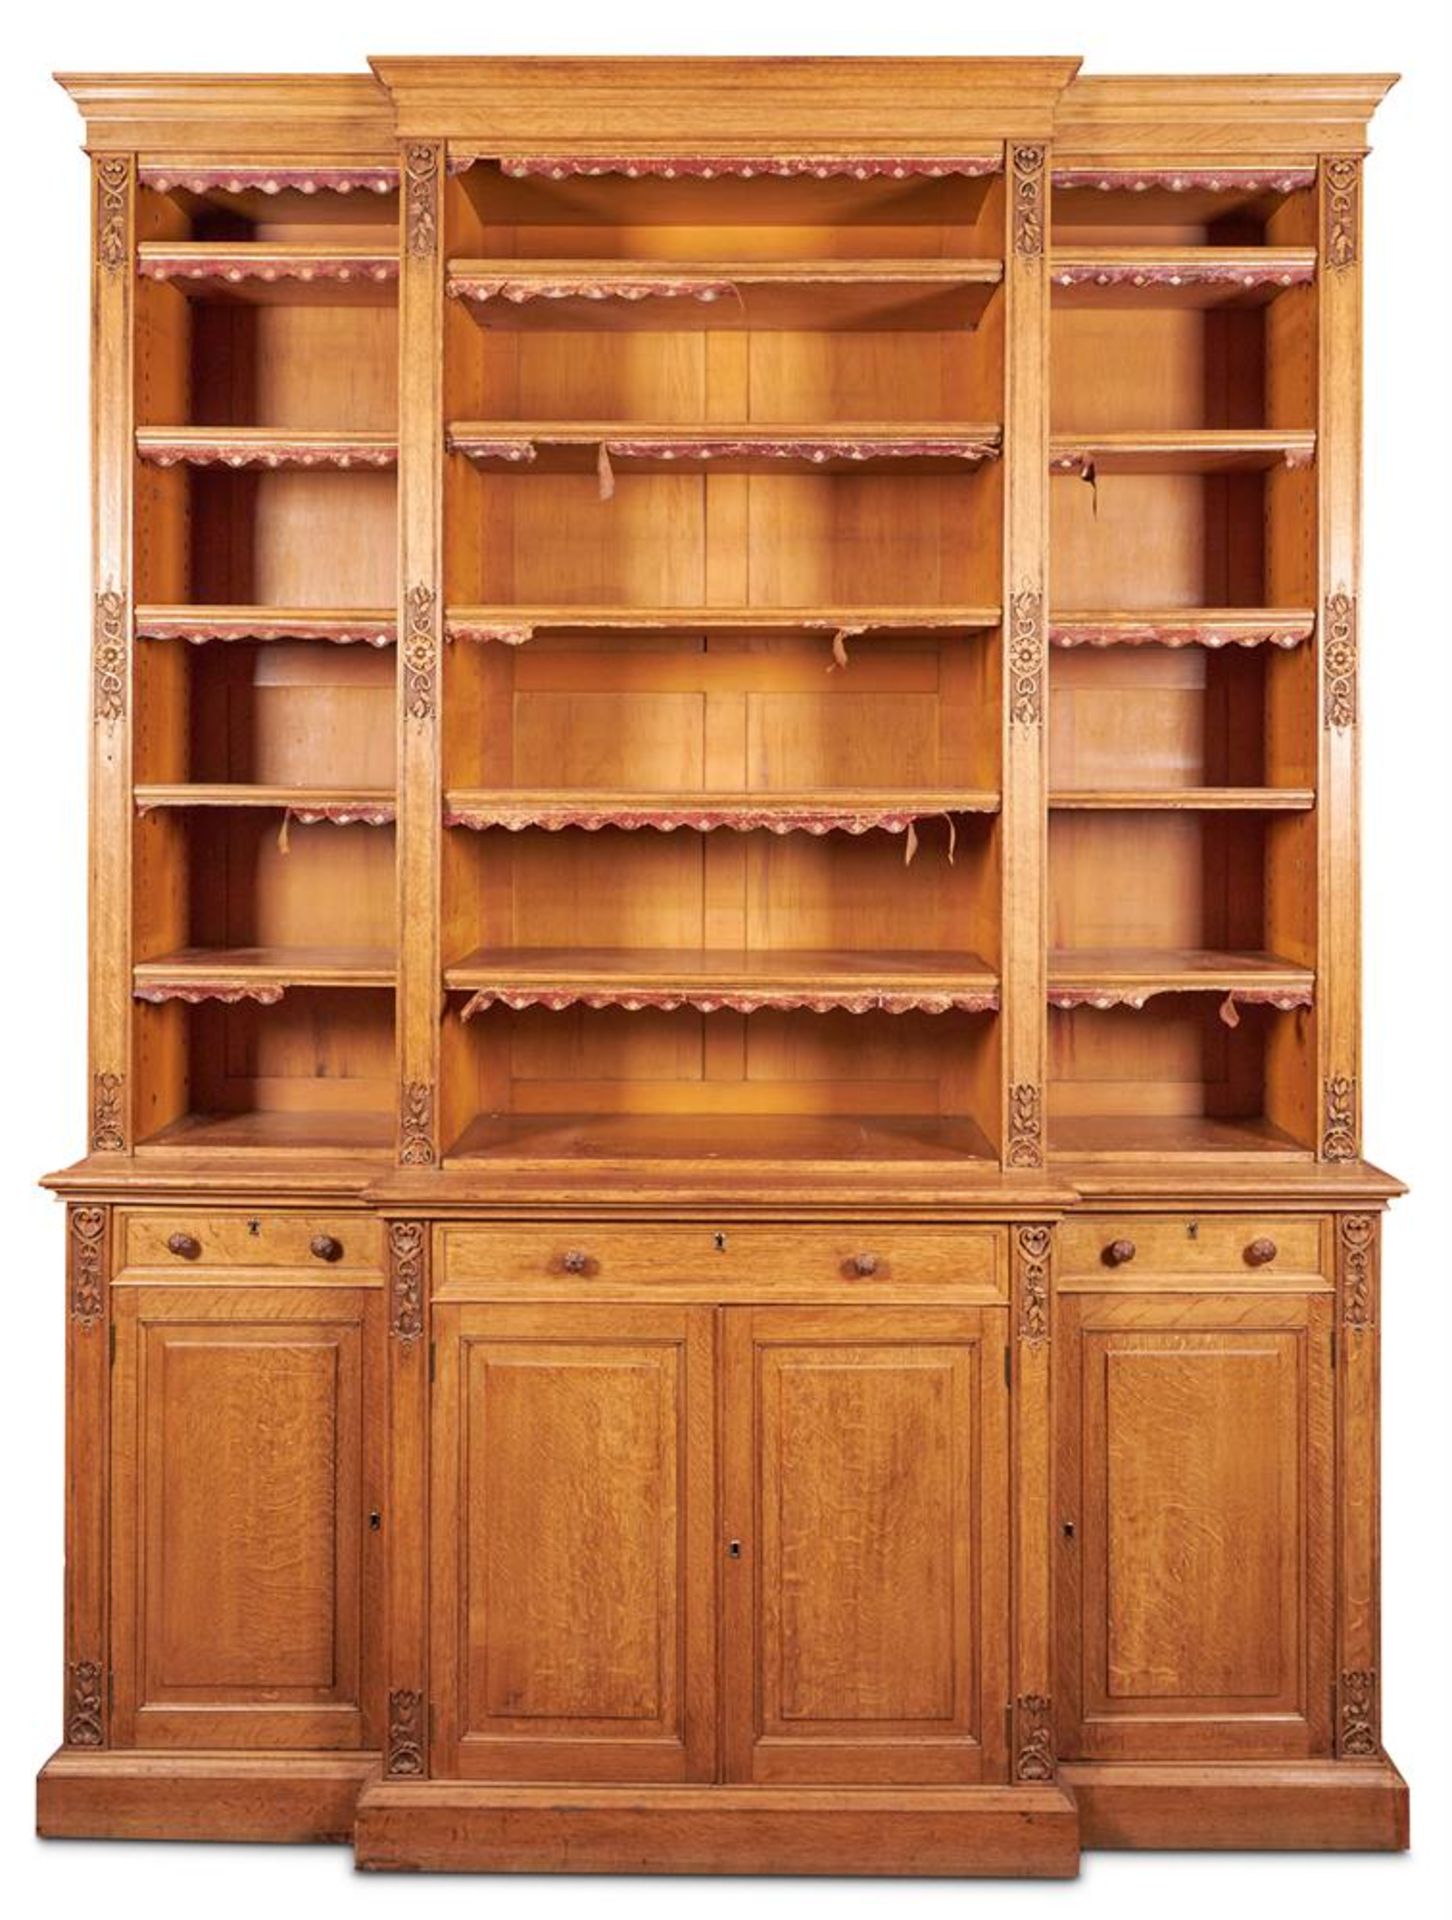 A VICTORIAN OAK BREAKFRONT BOOKCASE, THIRD QUARTER 19TH CENTURY - Image 2 of 4